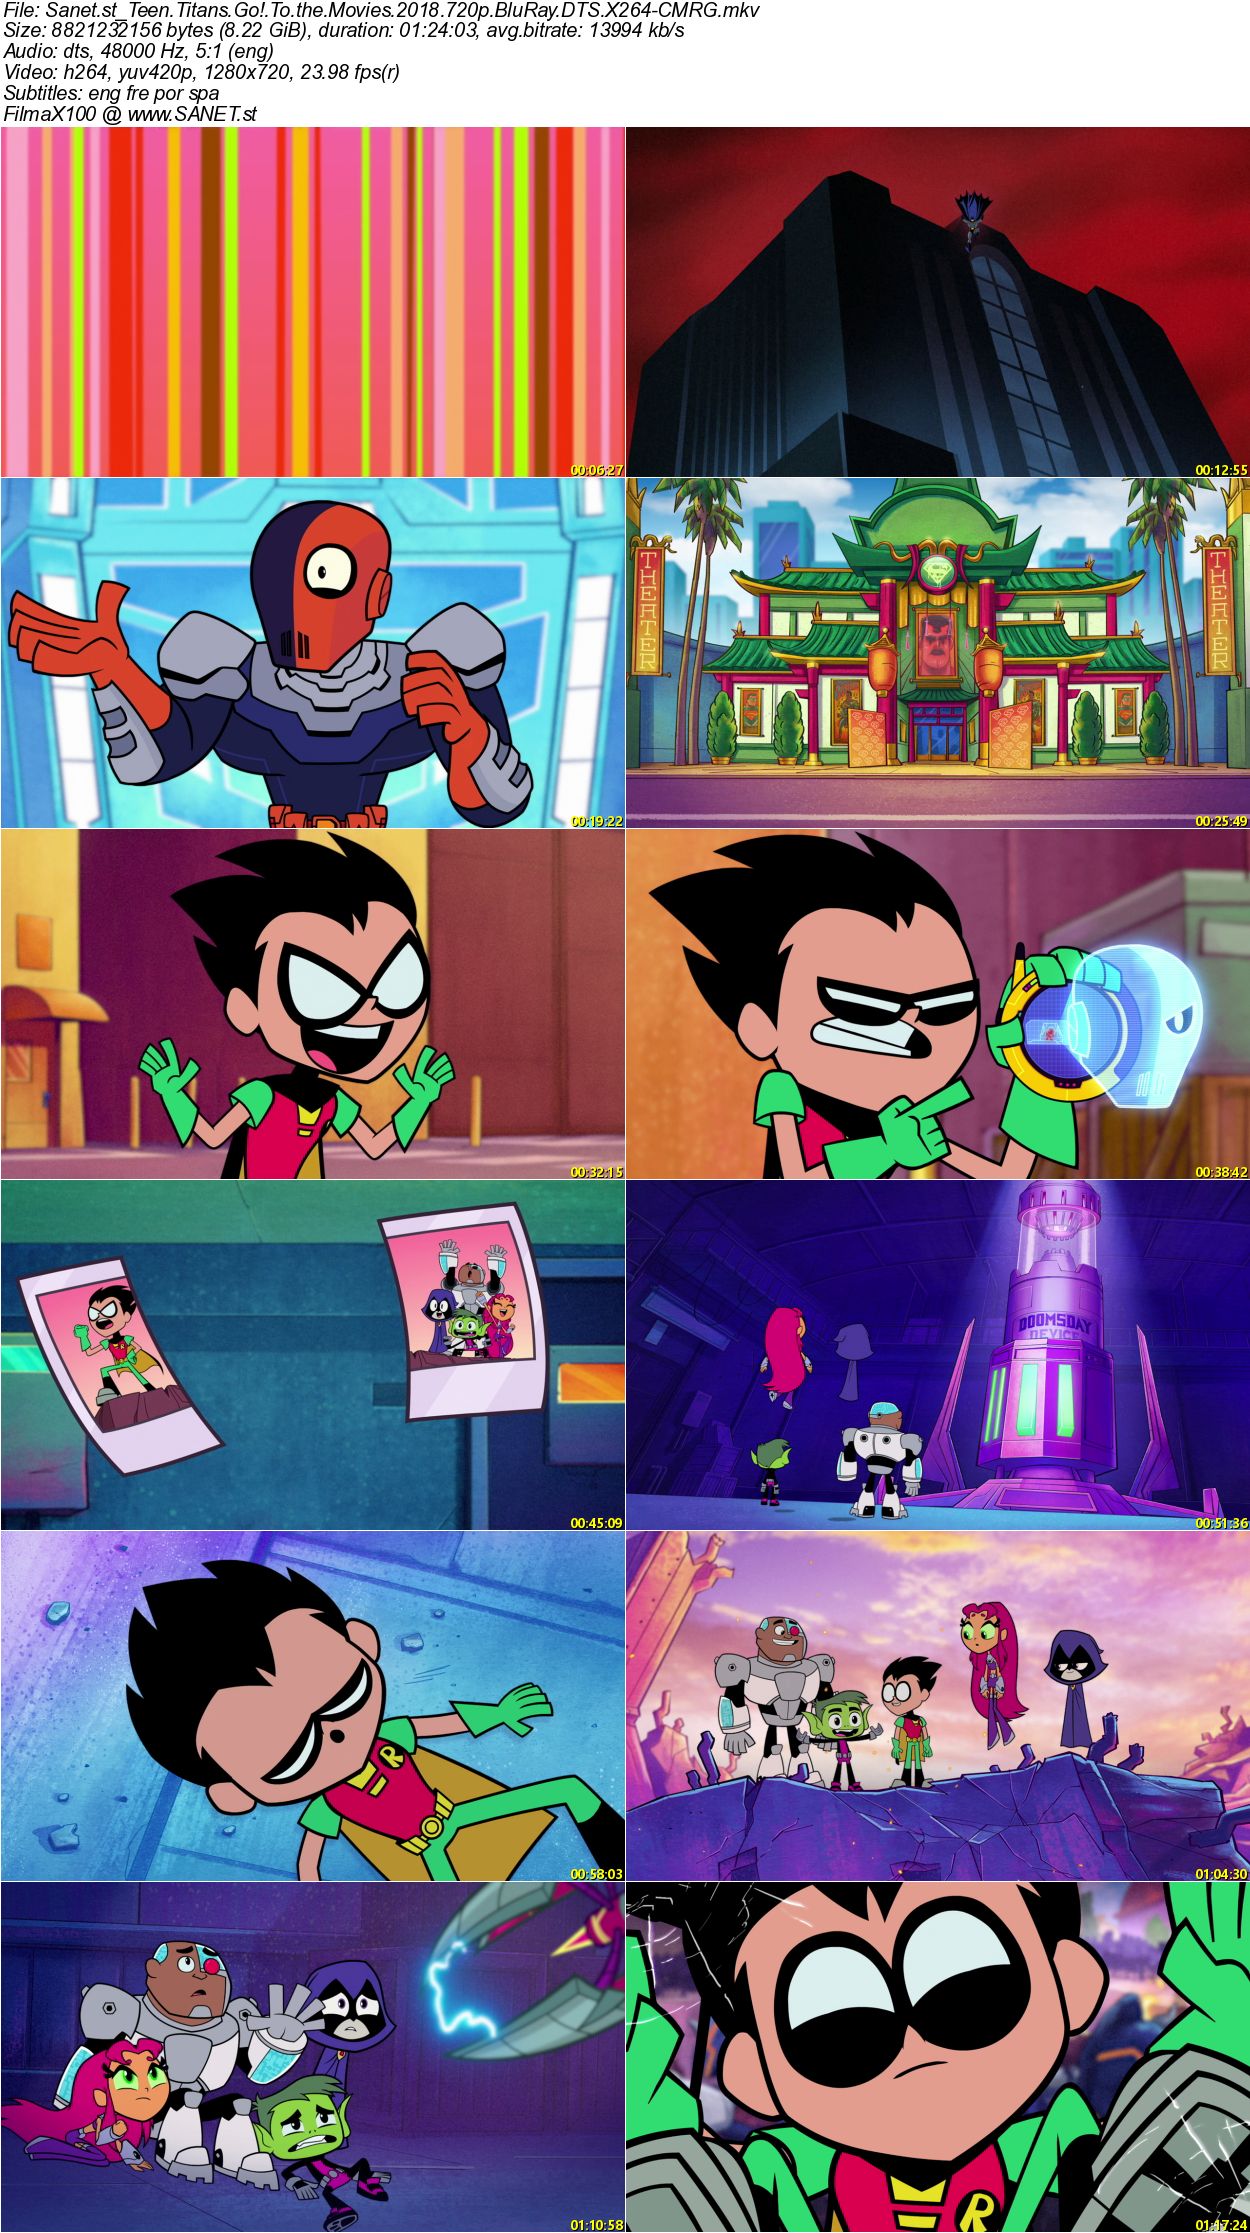 2018 Teen Titans Go! To The Movies